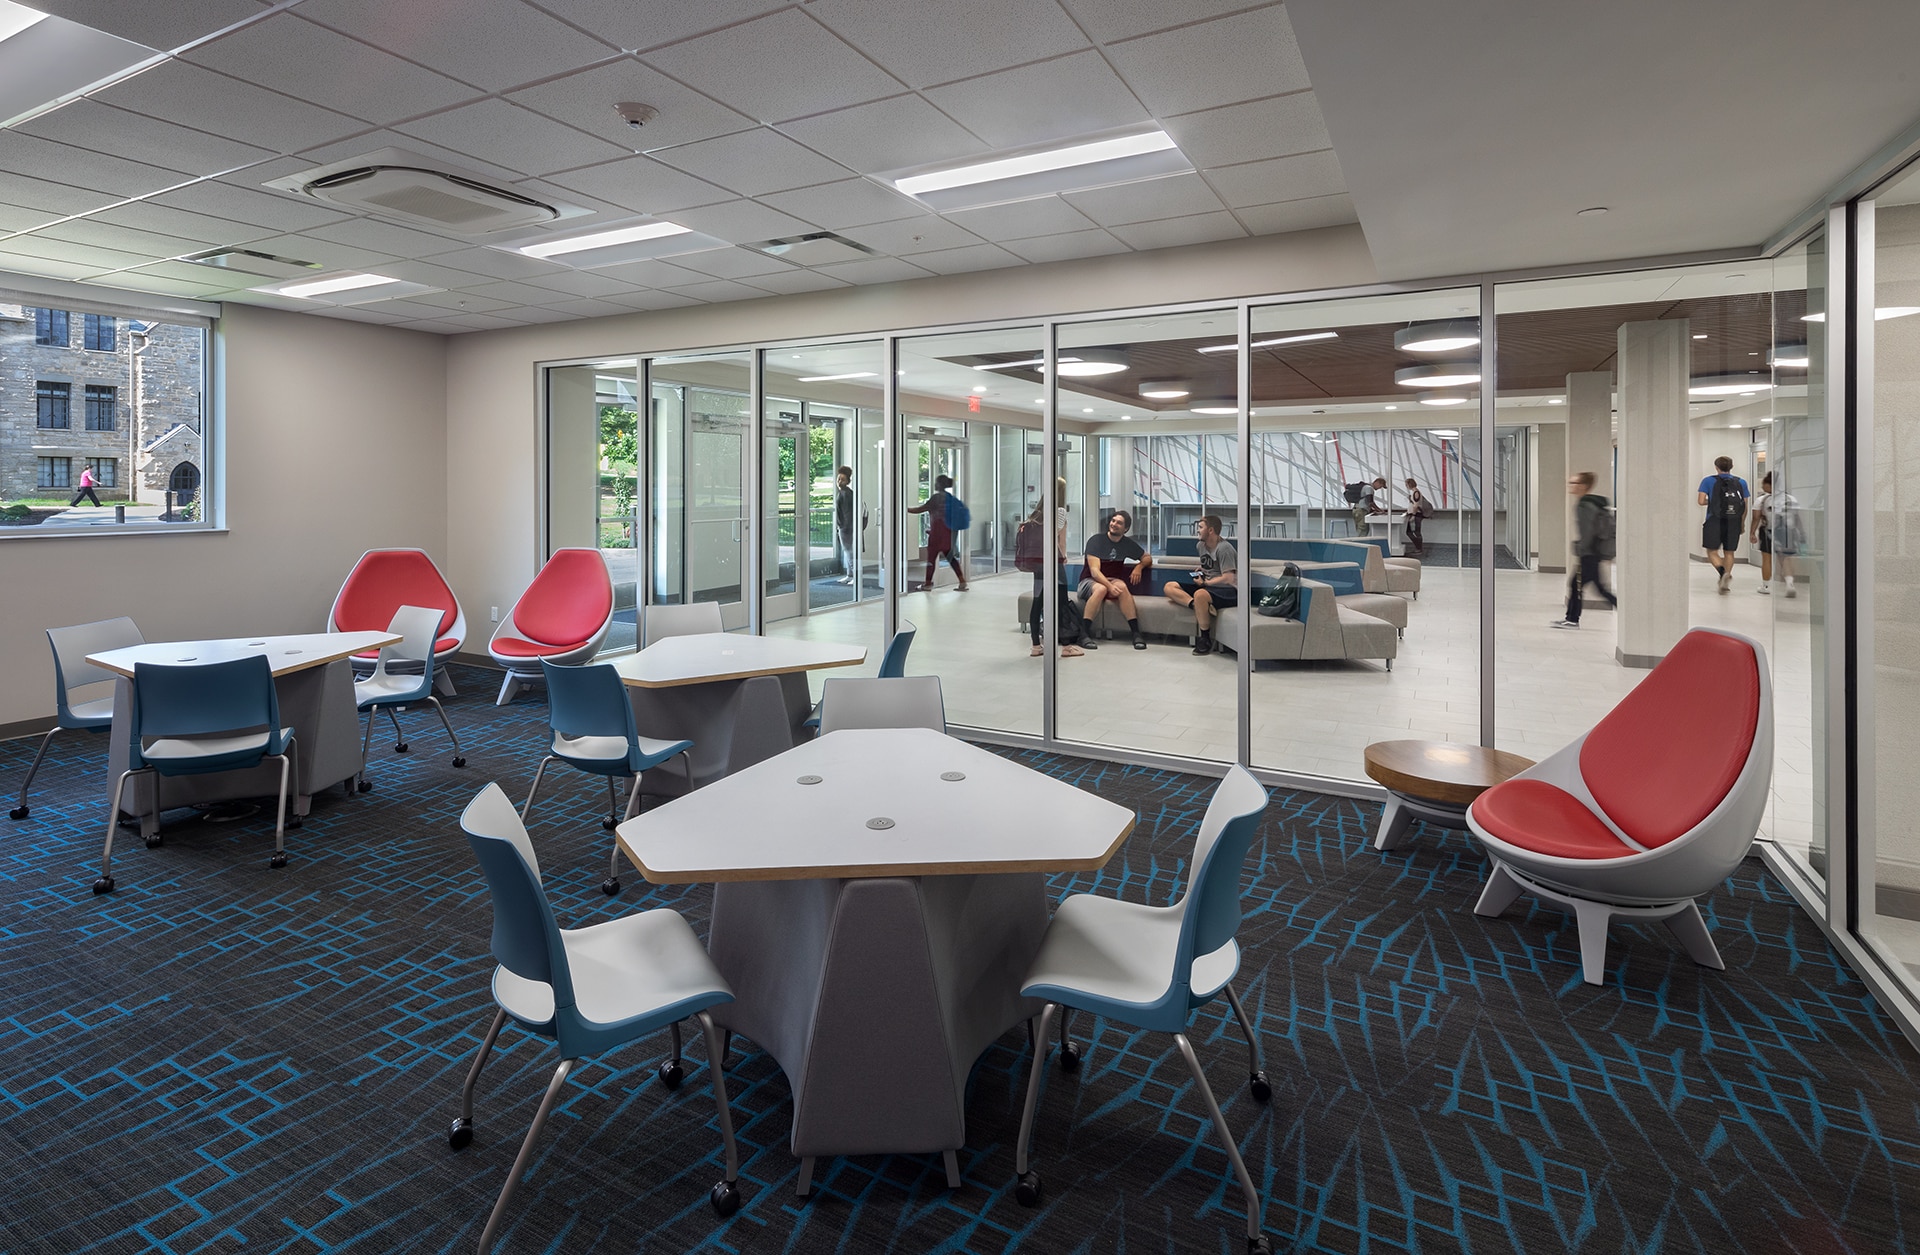 interior of central methodist university science building renovated by trivers architectural firm in st. louis